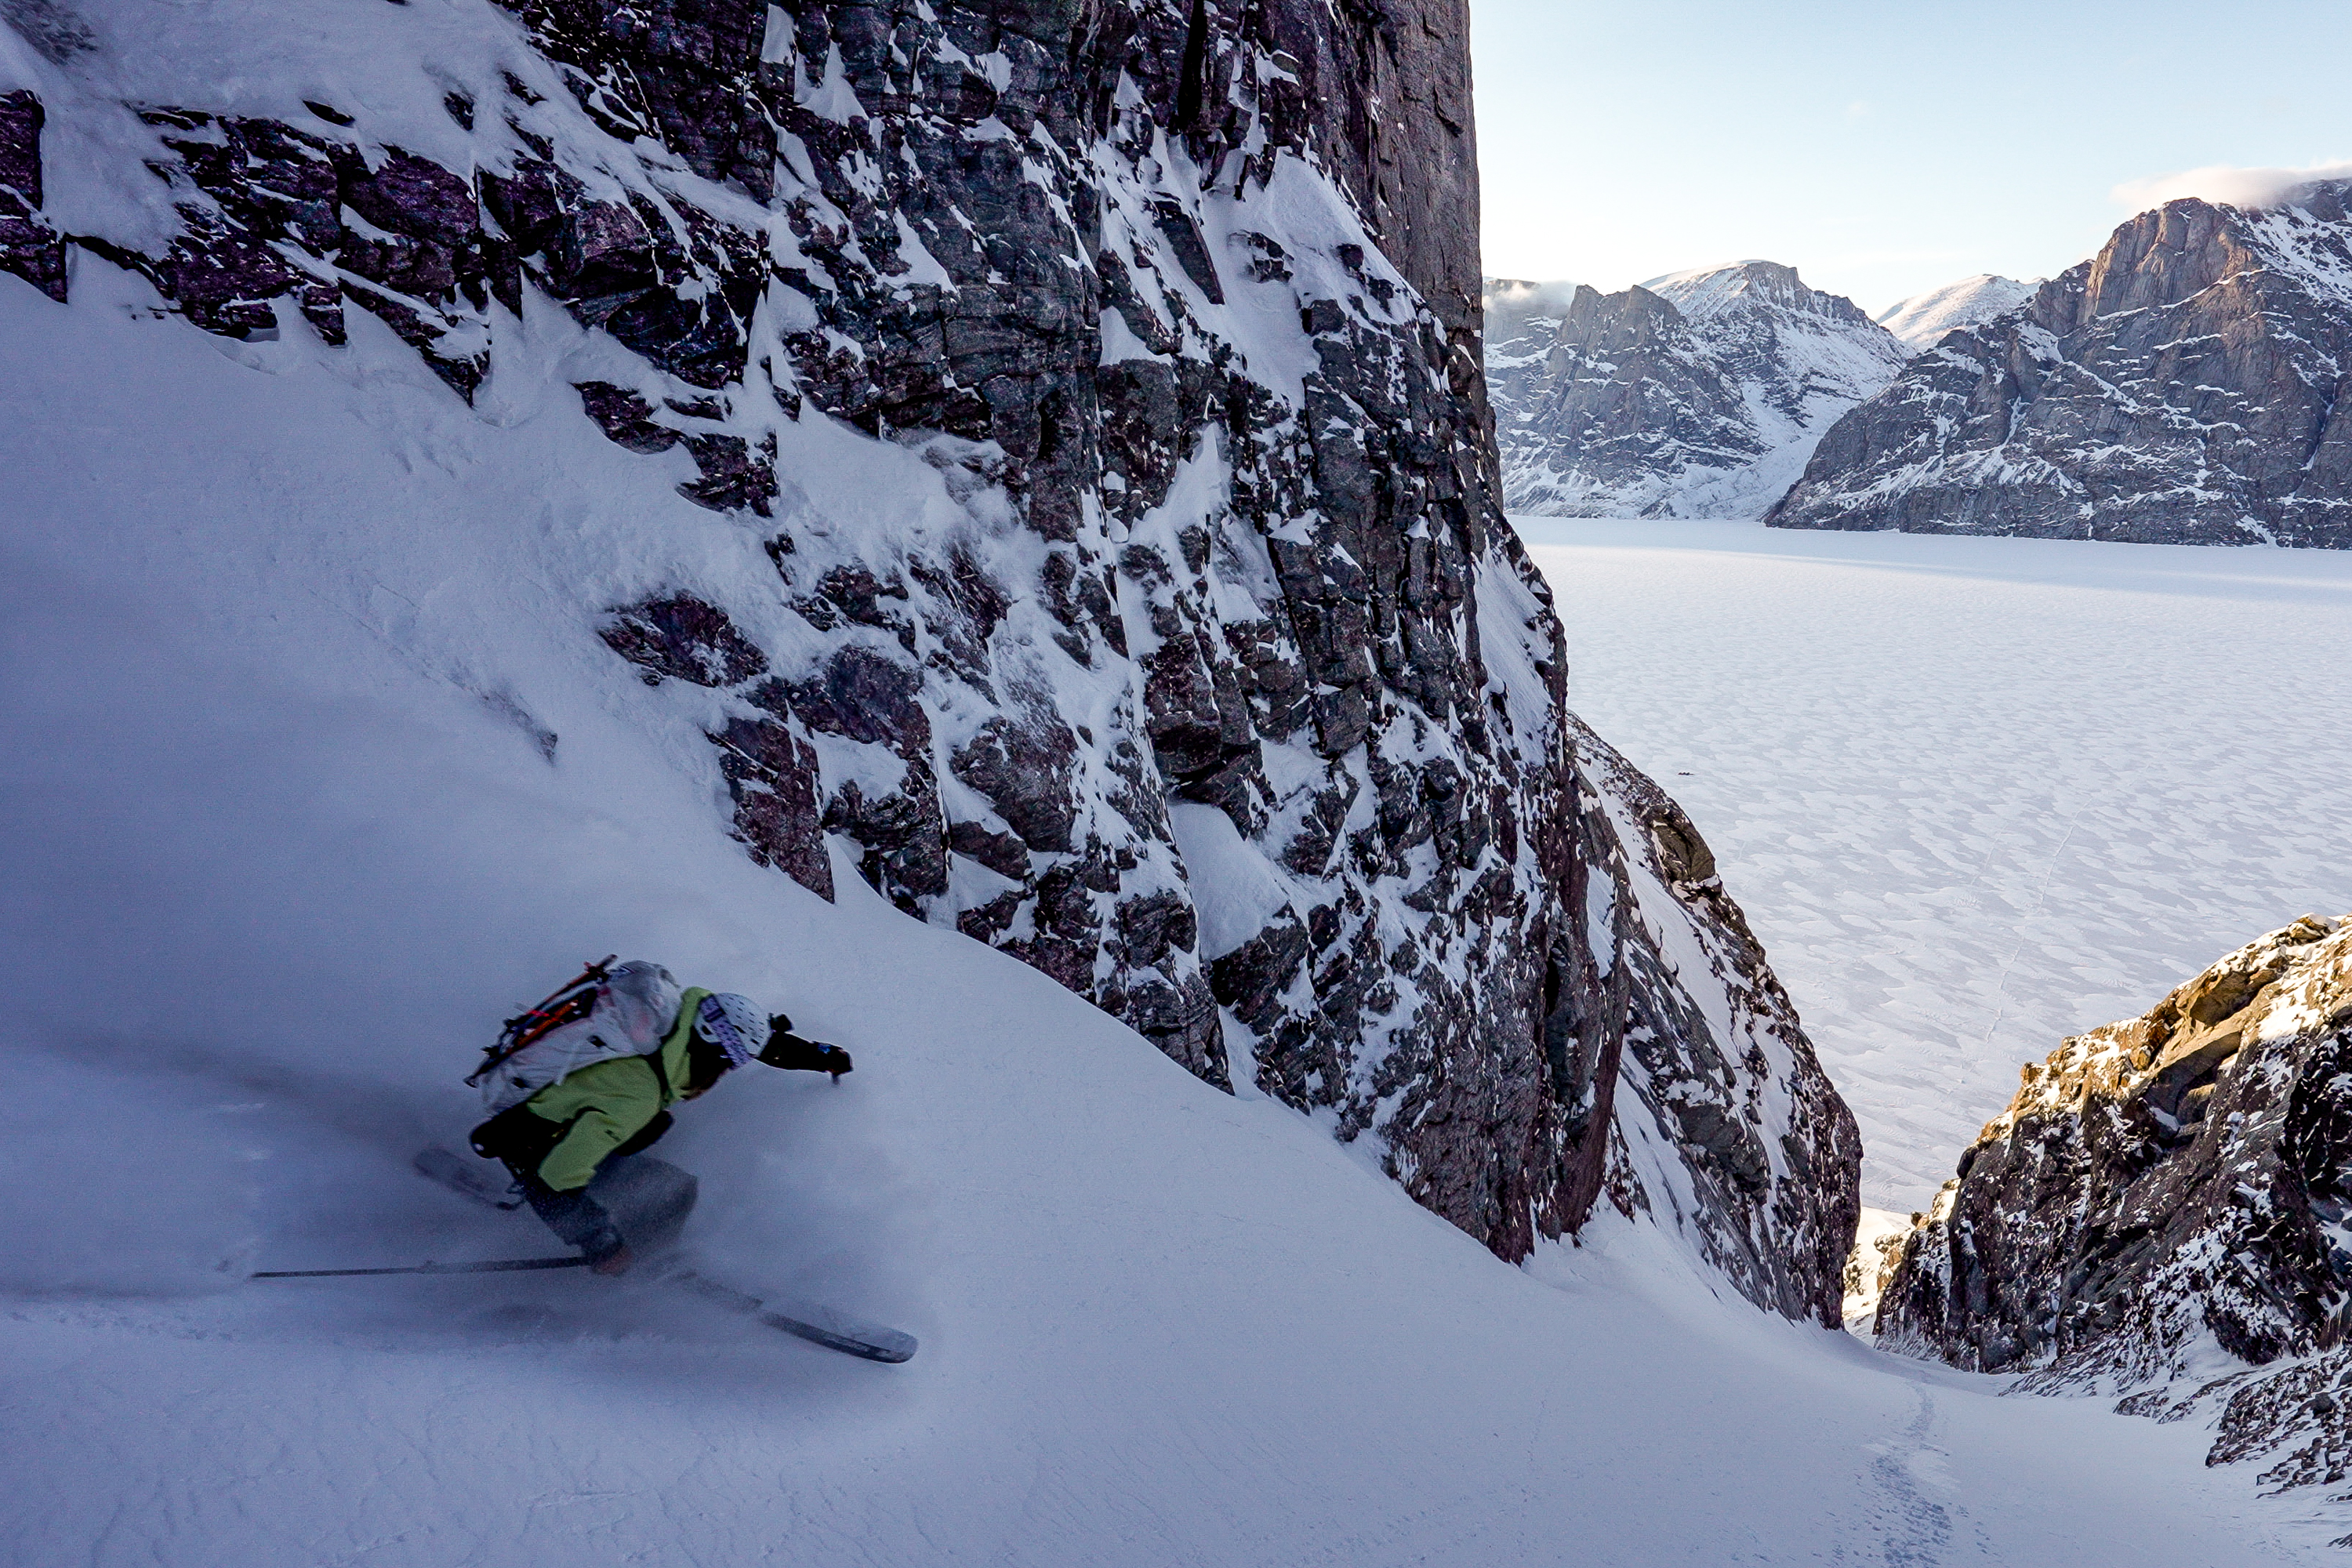 Review of Polar Star, Cody Townsend’s latest mission in the “Ski the Fifty” project